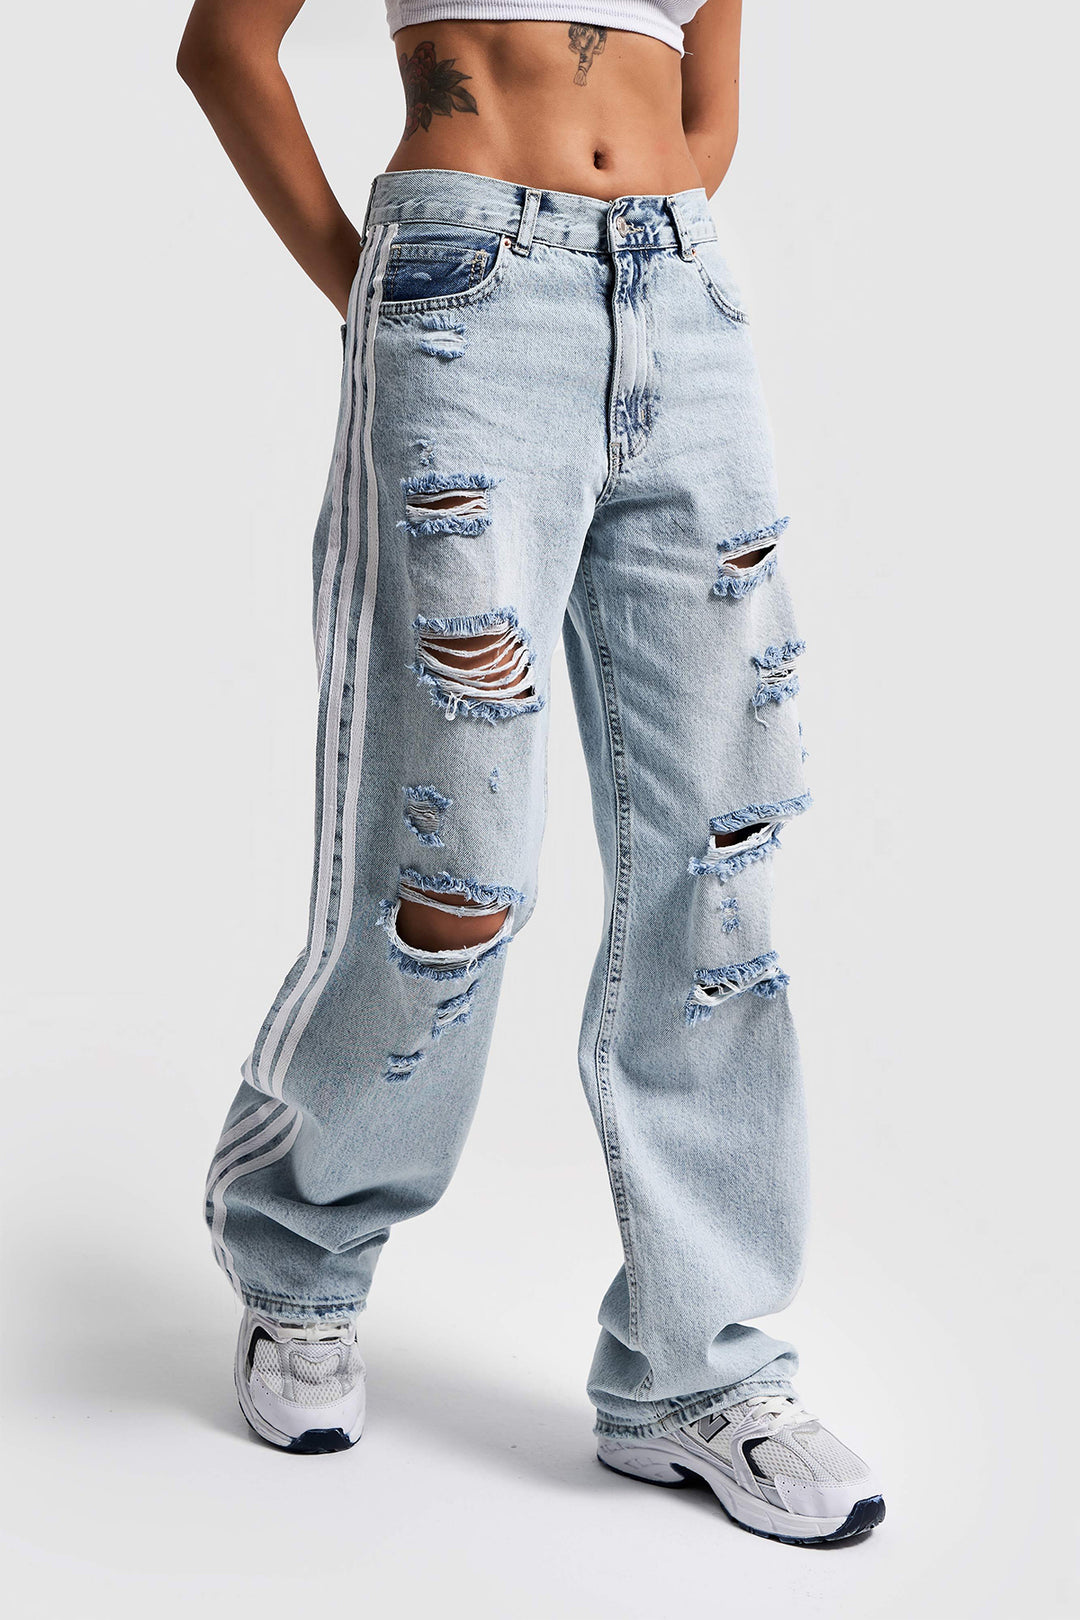 Routines Striped Ripped Straight Leg Jeans 3258 Jeans Routines Fashion   